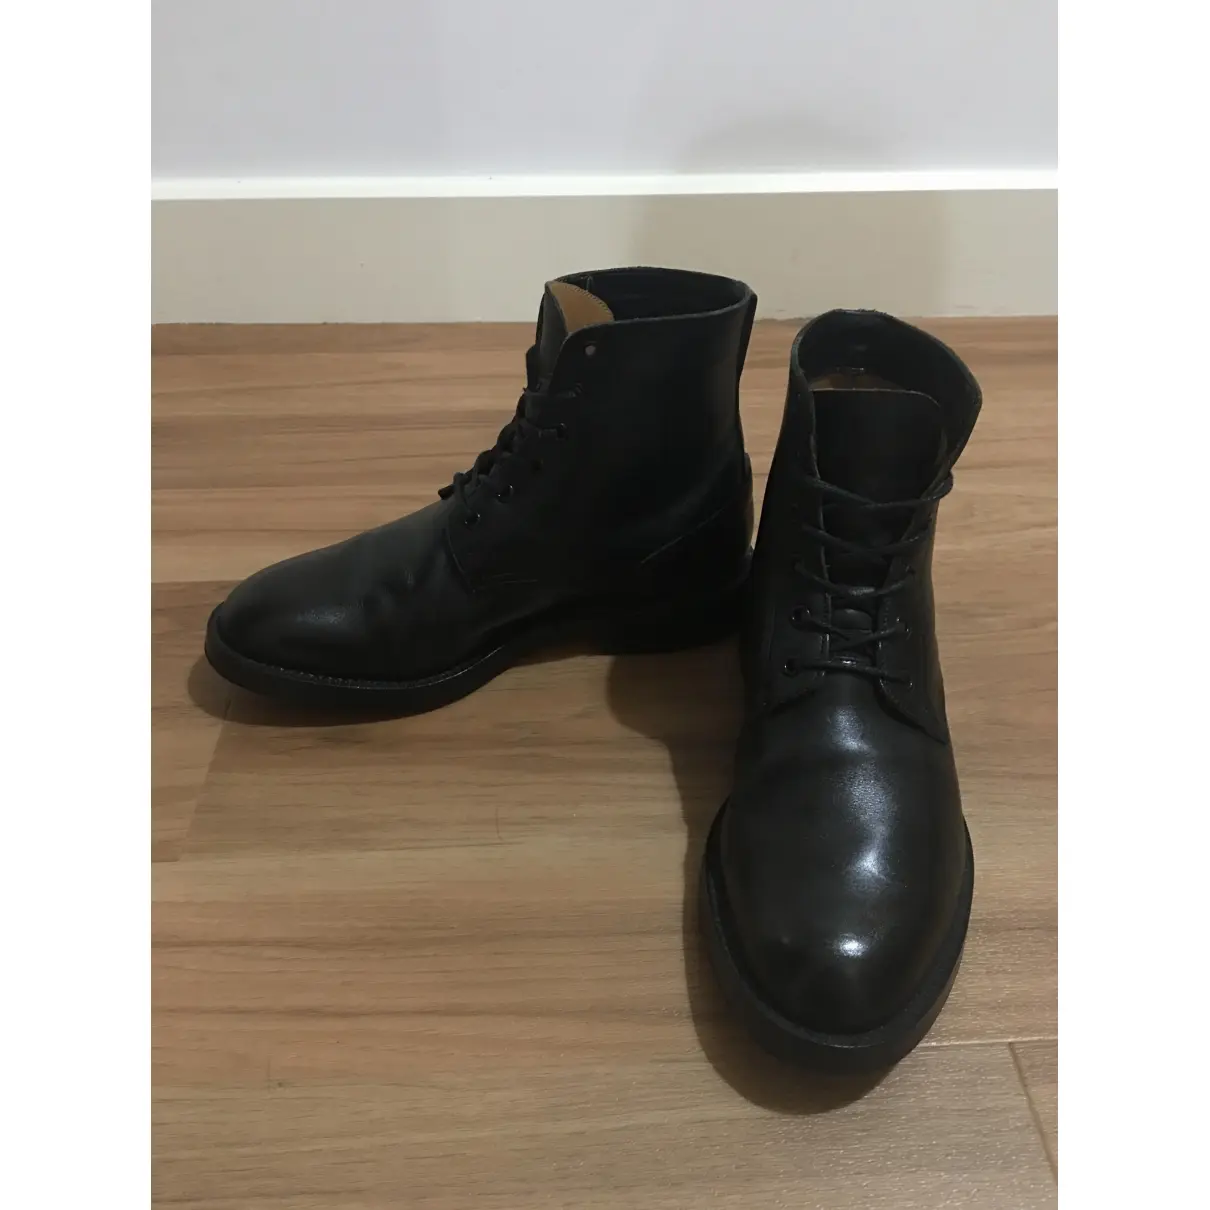 Trickers London Leather boots for sale